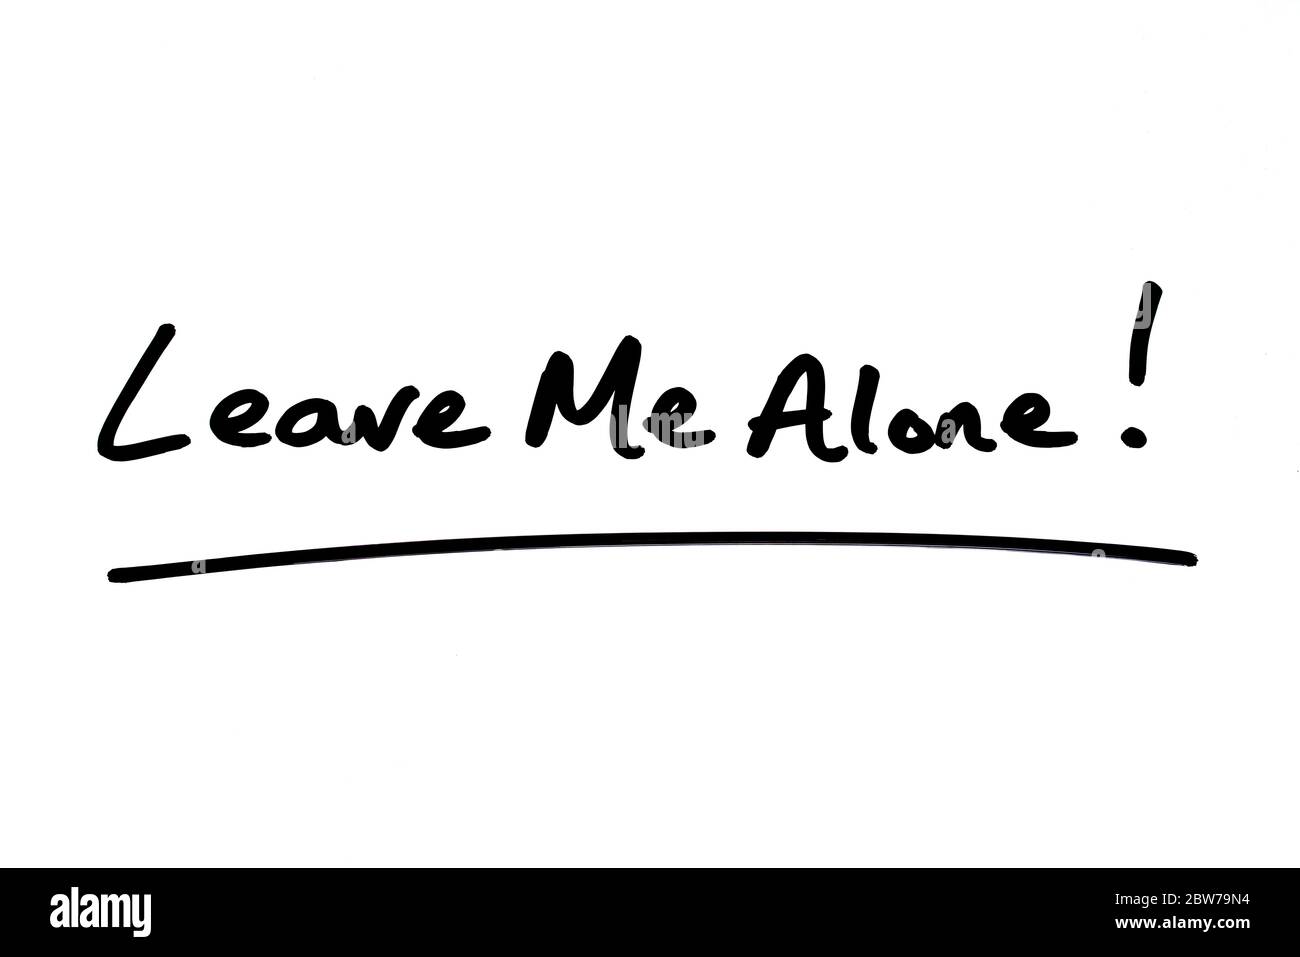 Leave Me Alone! handwritten on a white background Stock Photo - Alamy